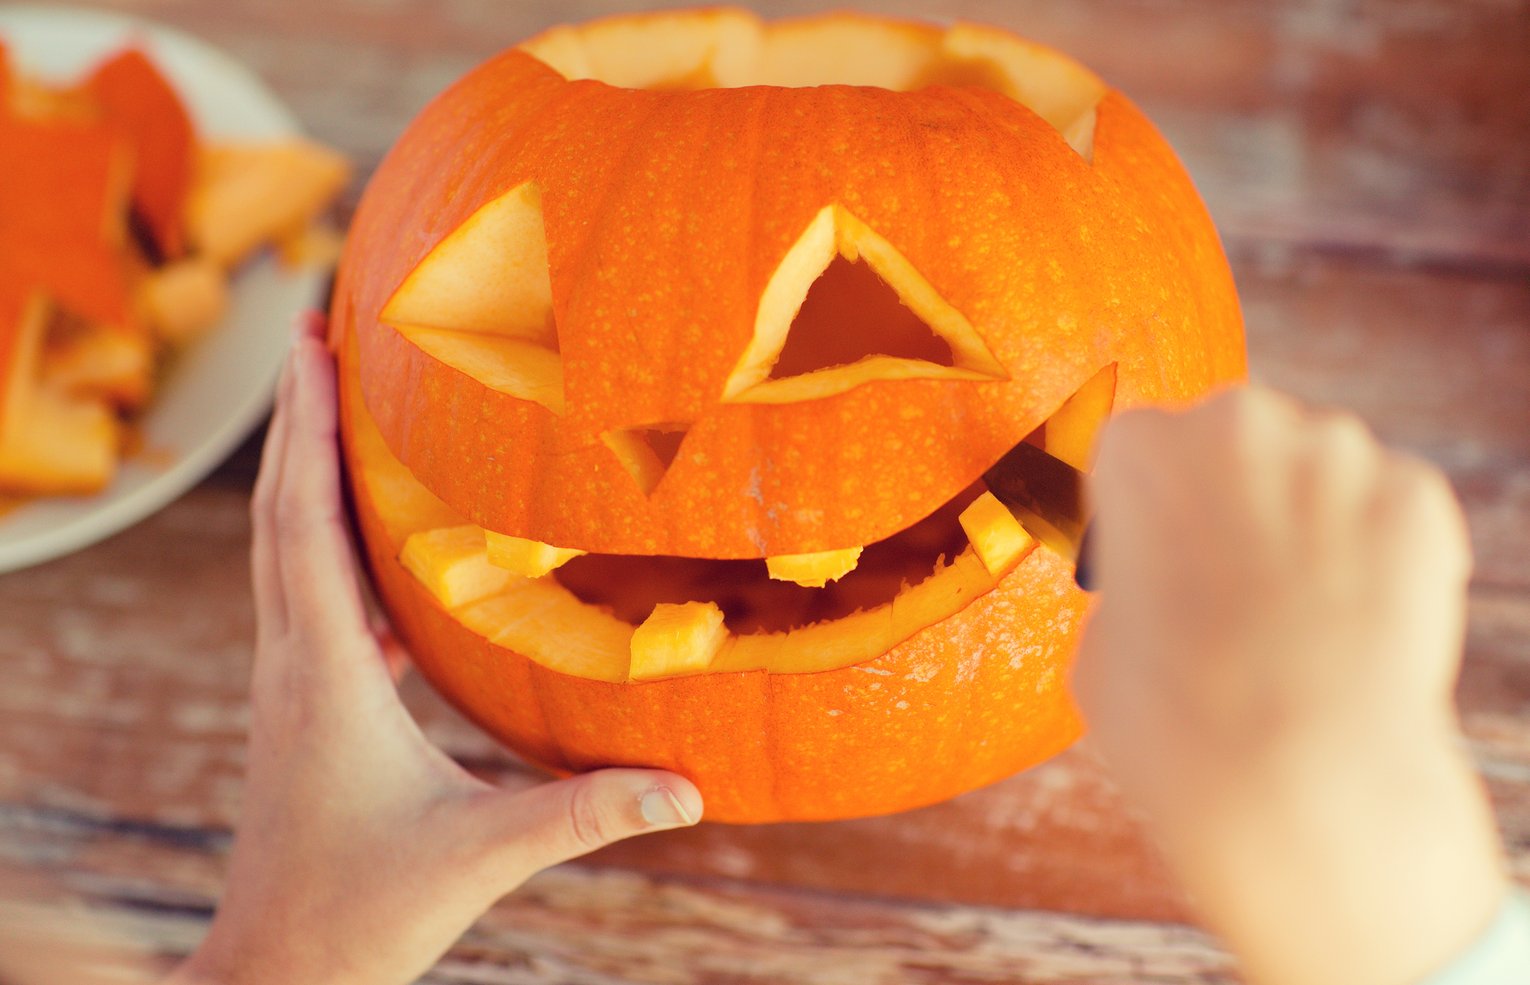 Watch This: Easy Ways to Add ‘Spook’ to Your Pumpkin